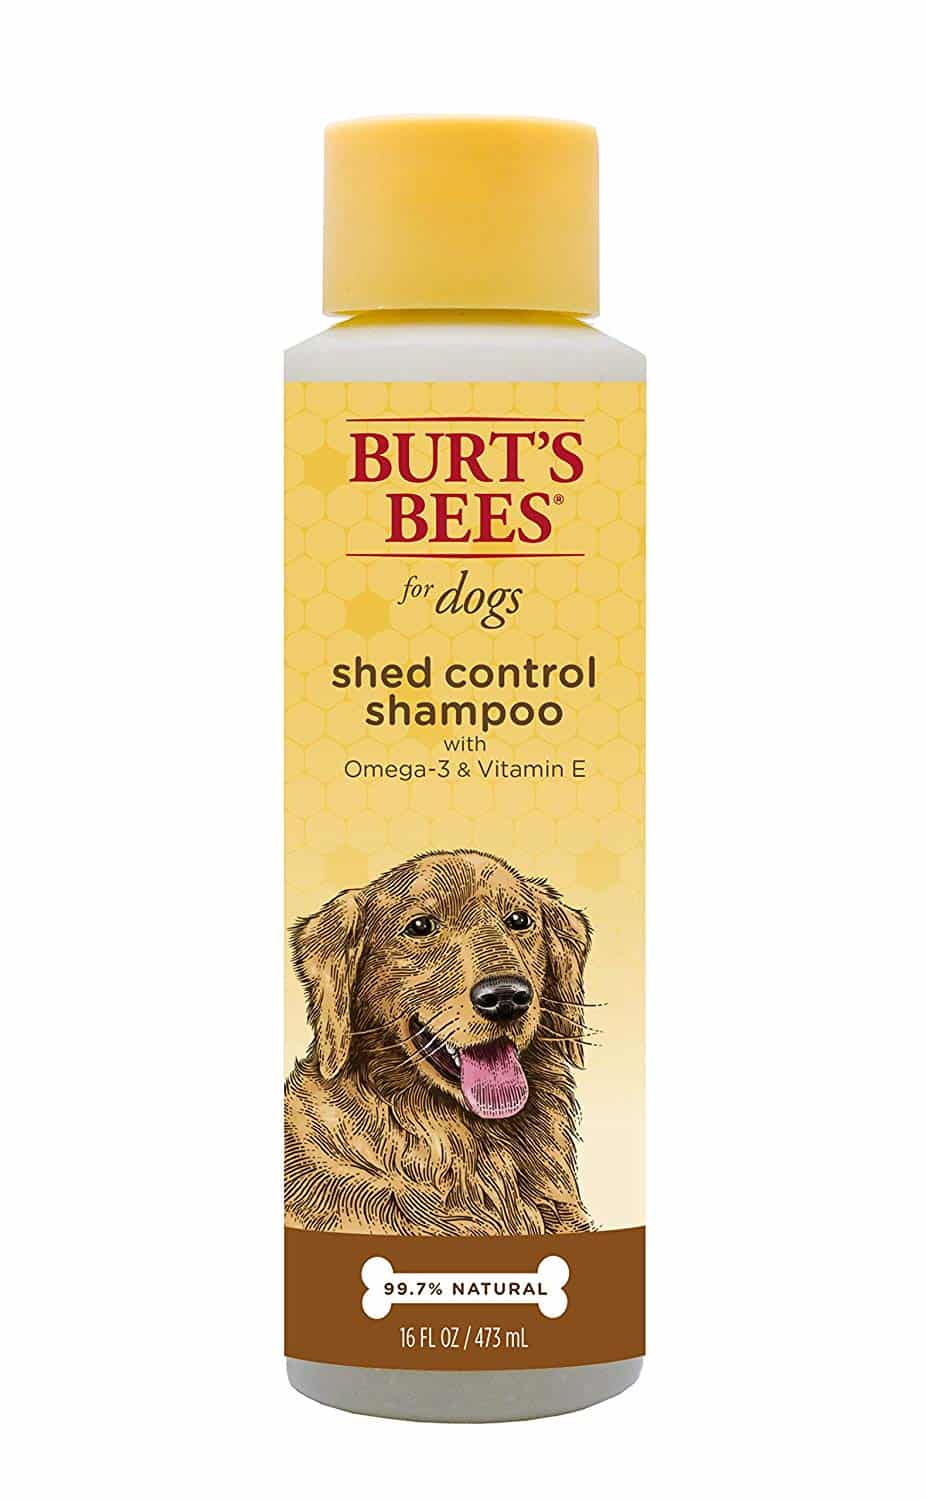 Burt's Bees All-Natural Shampoo- shed and odor control